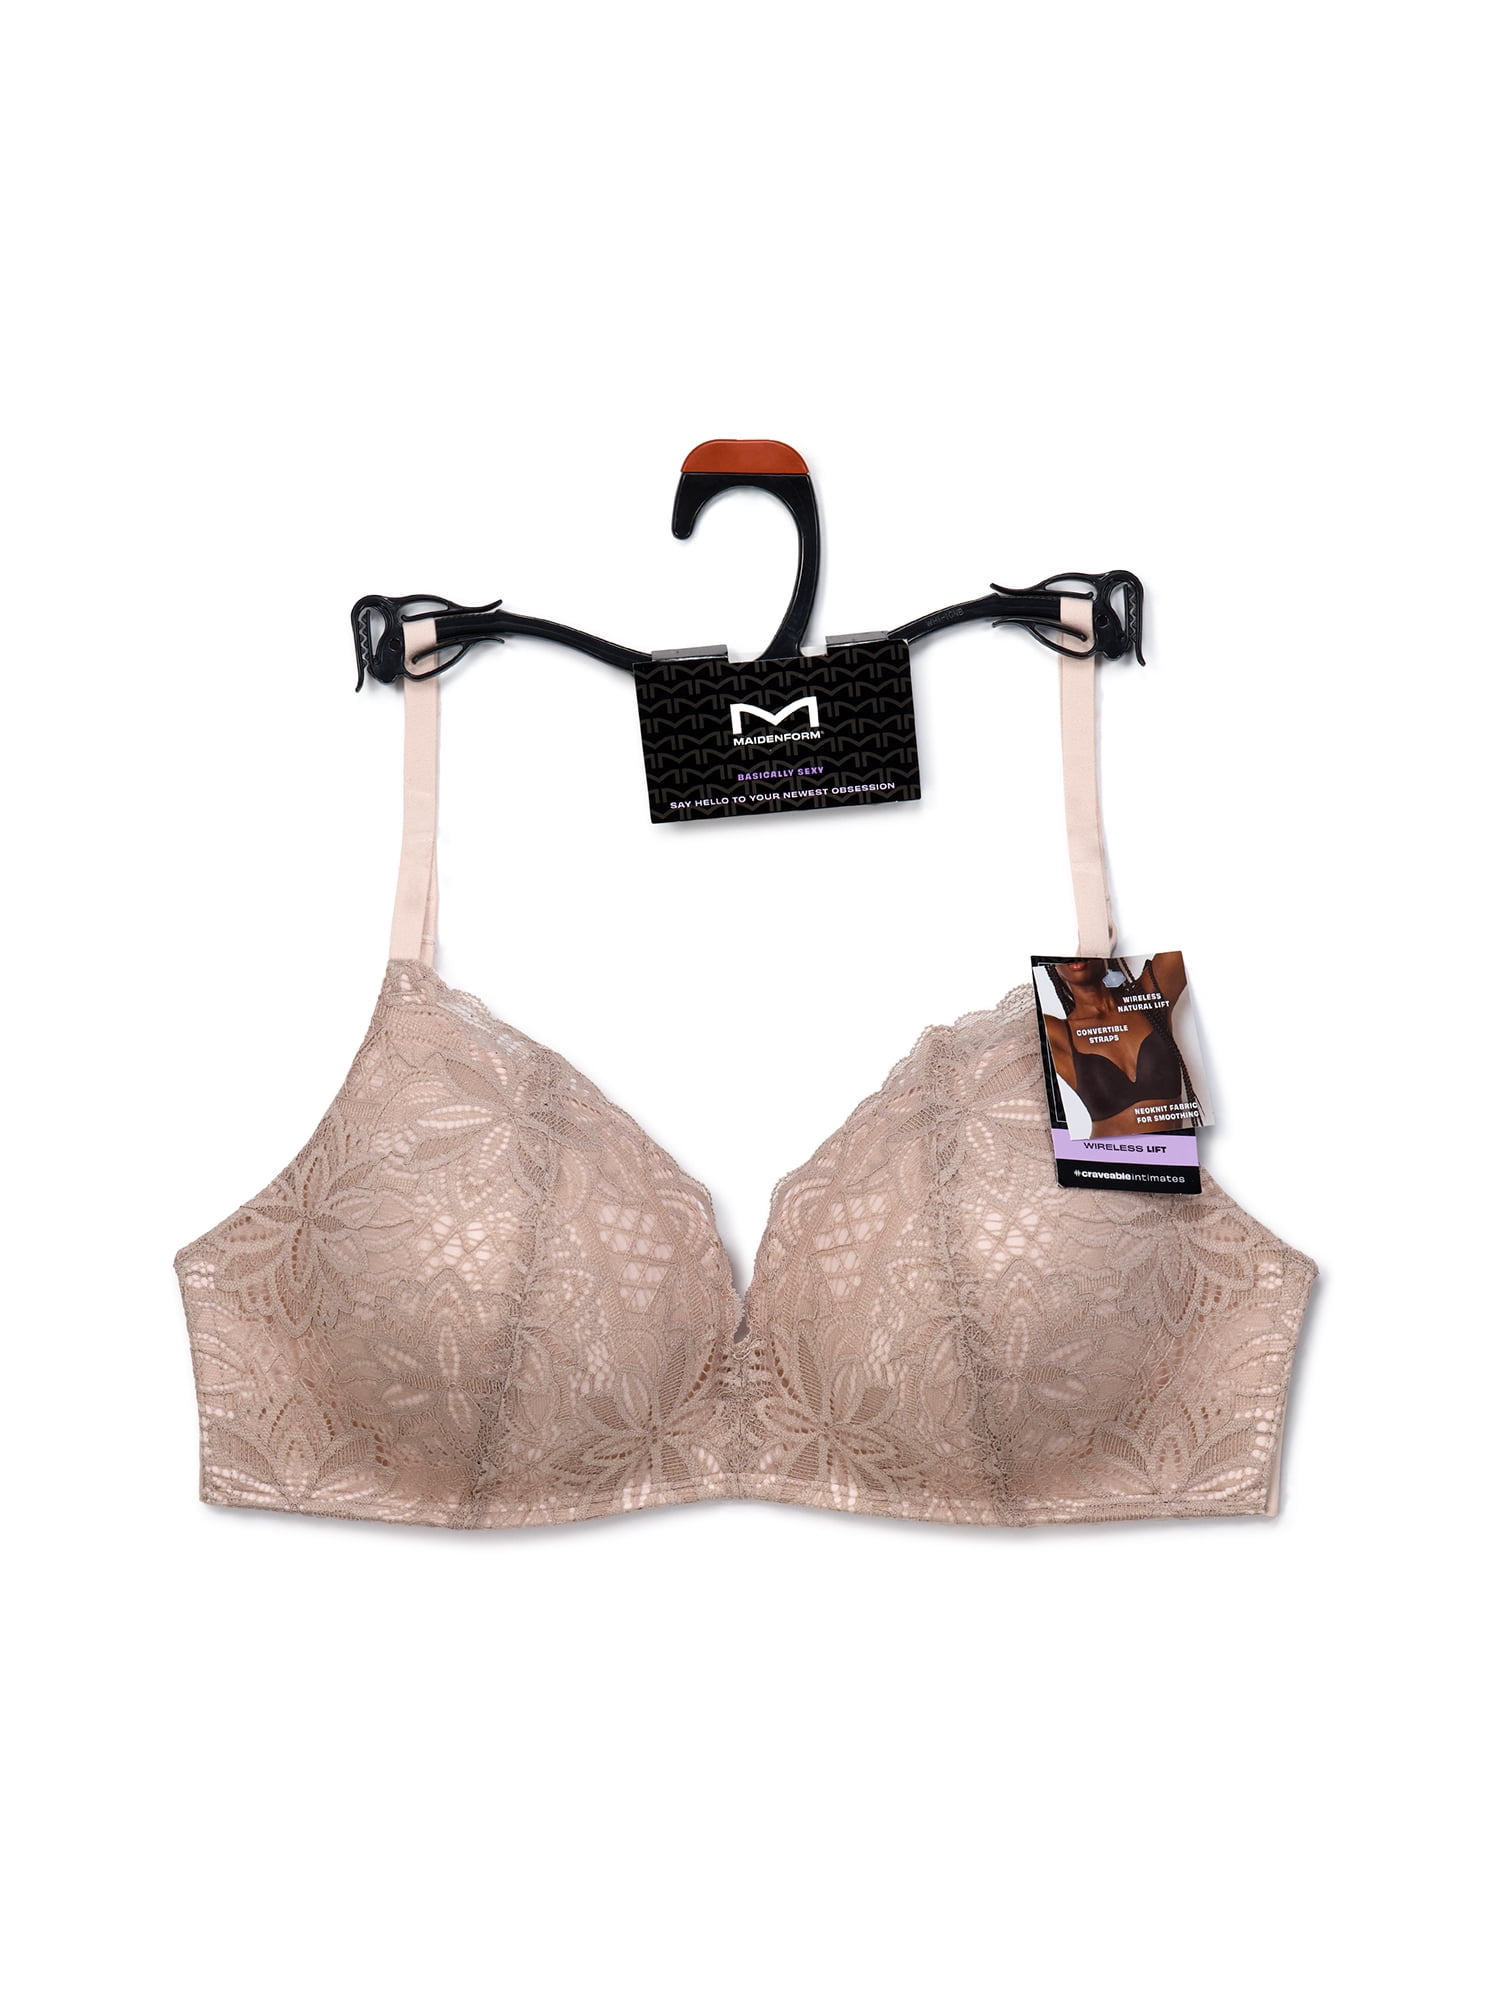 Lift-and-Shape! Full Coverage Lifting Wireless Bra in Matte Pearl Blus